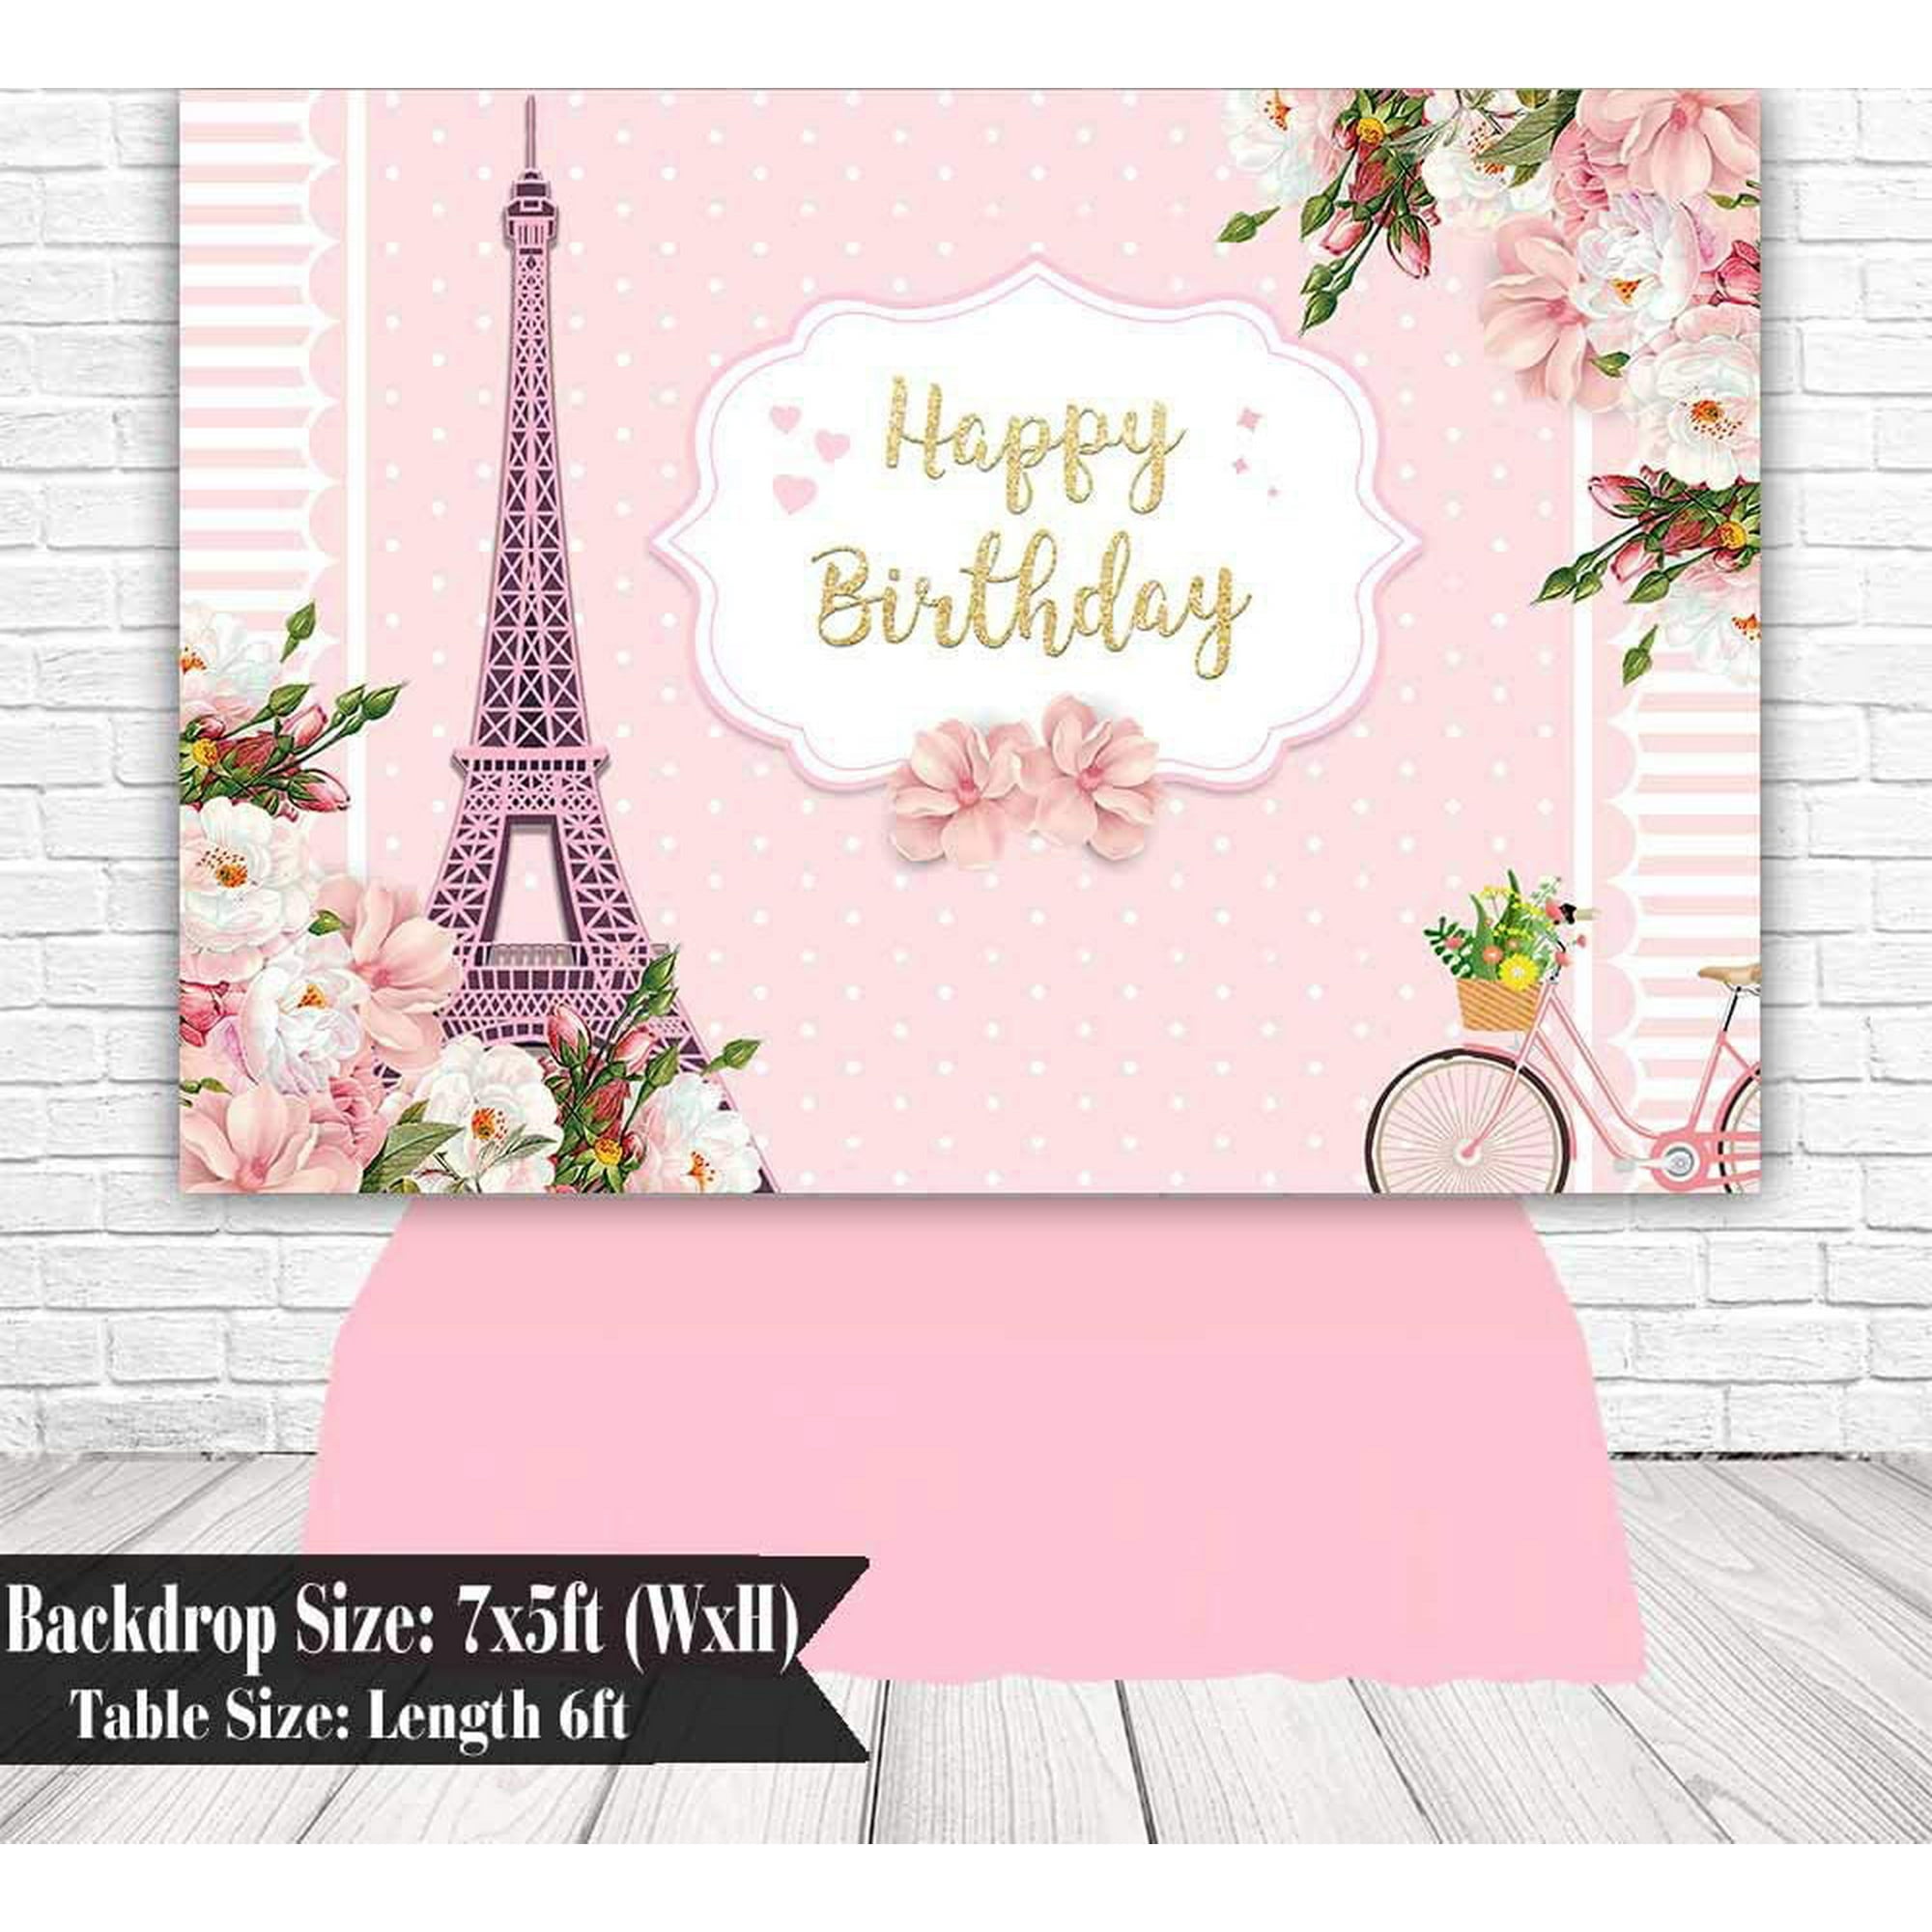 YEELE 10x8ft Paris Eiffel with Bow Backdrop for Girls Birthday Party Celebration Photography Background Lady Woman Mom Portrait Dessert Table Room Decoration Photobooth Props Digital Wallpaper 